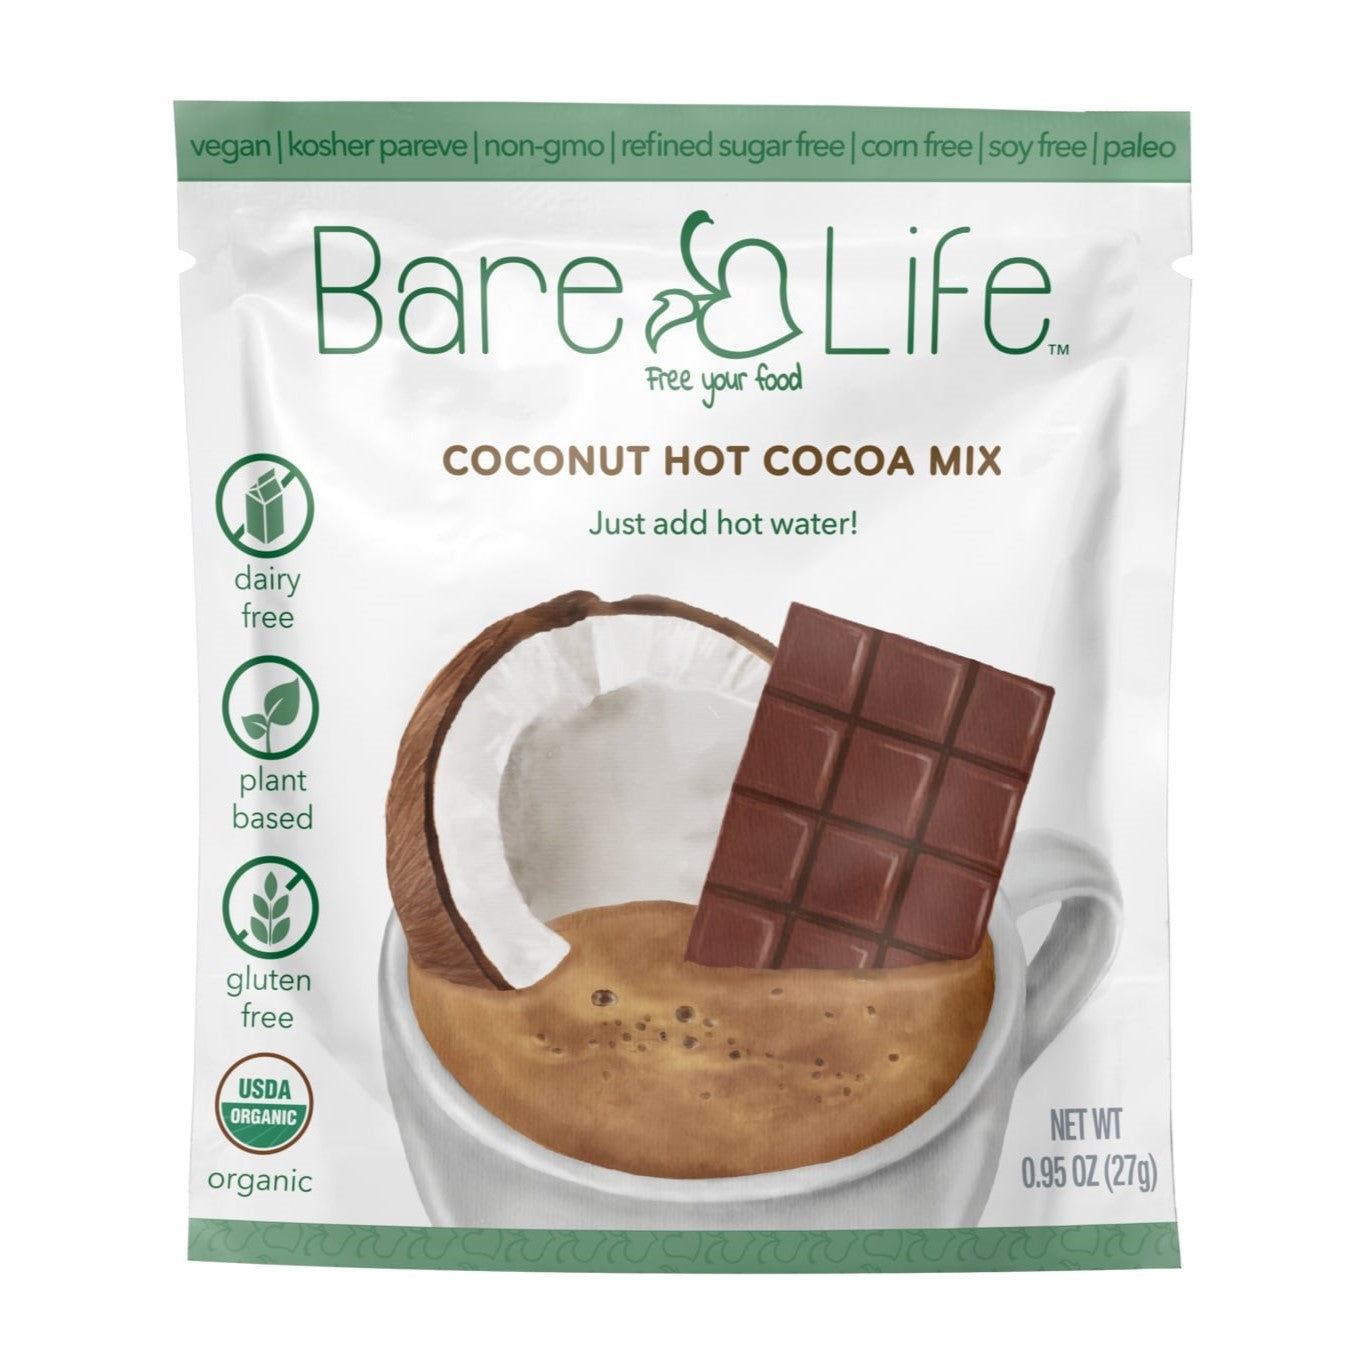 Is Hot Chocolate Gluten-Free? (BRANDS THAT ARE!) - Meaningful Eats